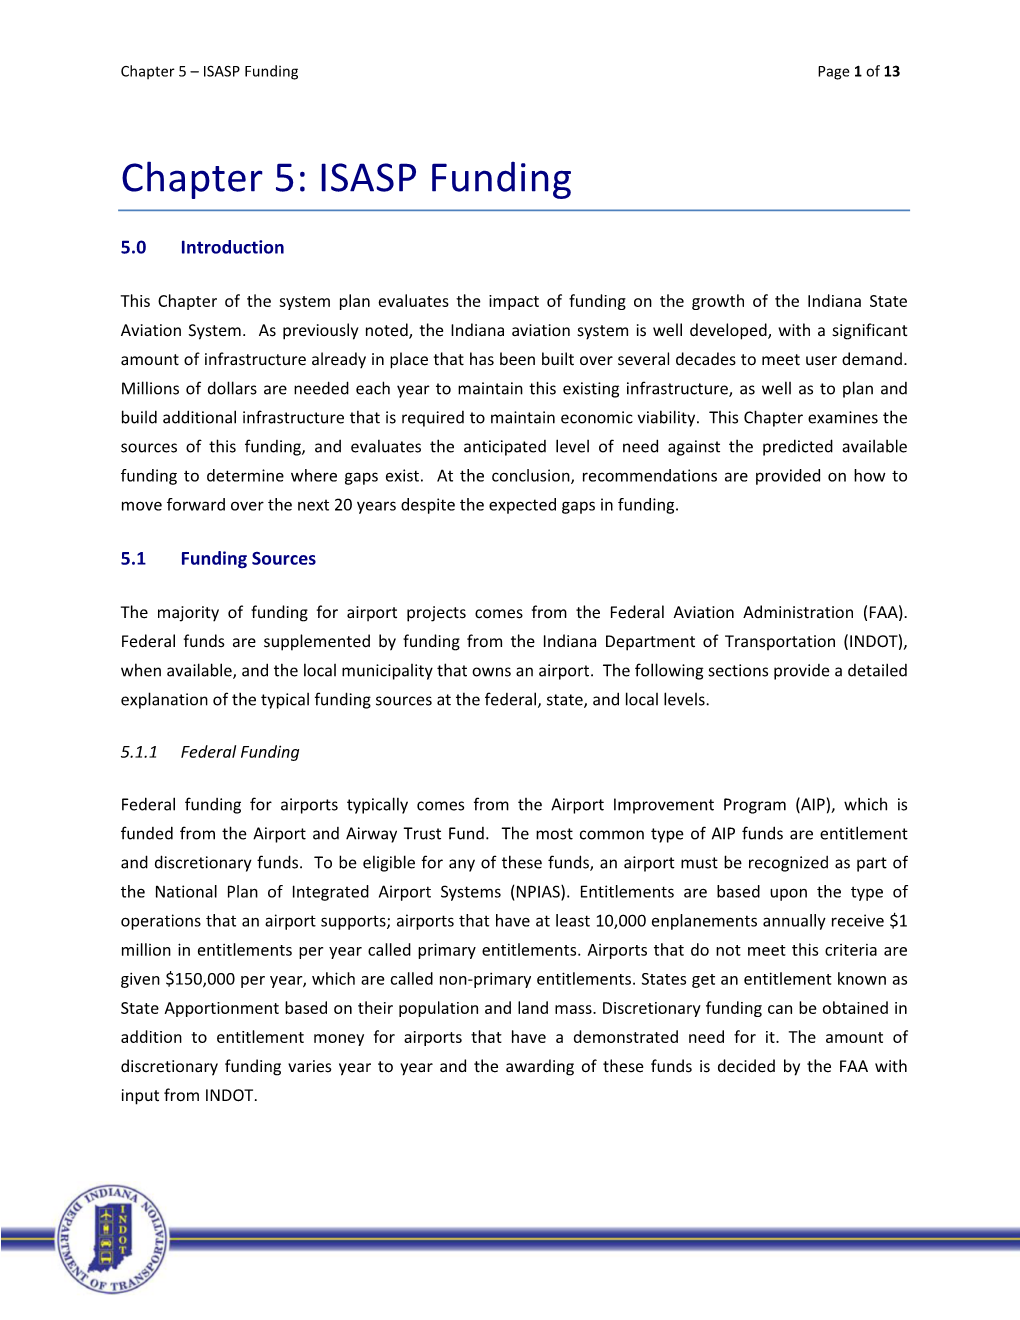 Chapter 5: ISASP Funding